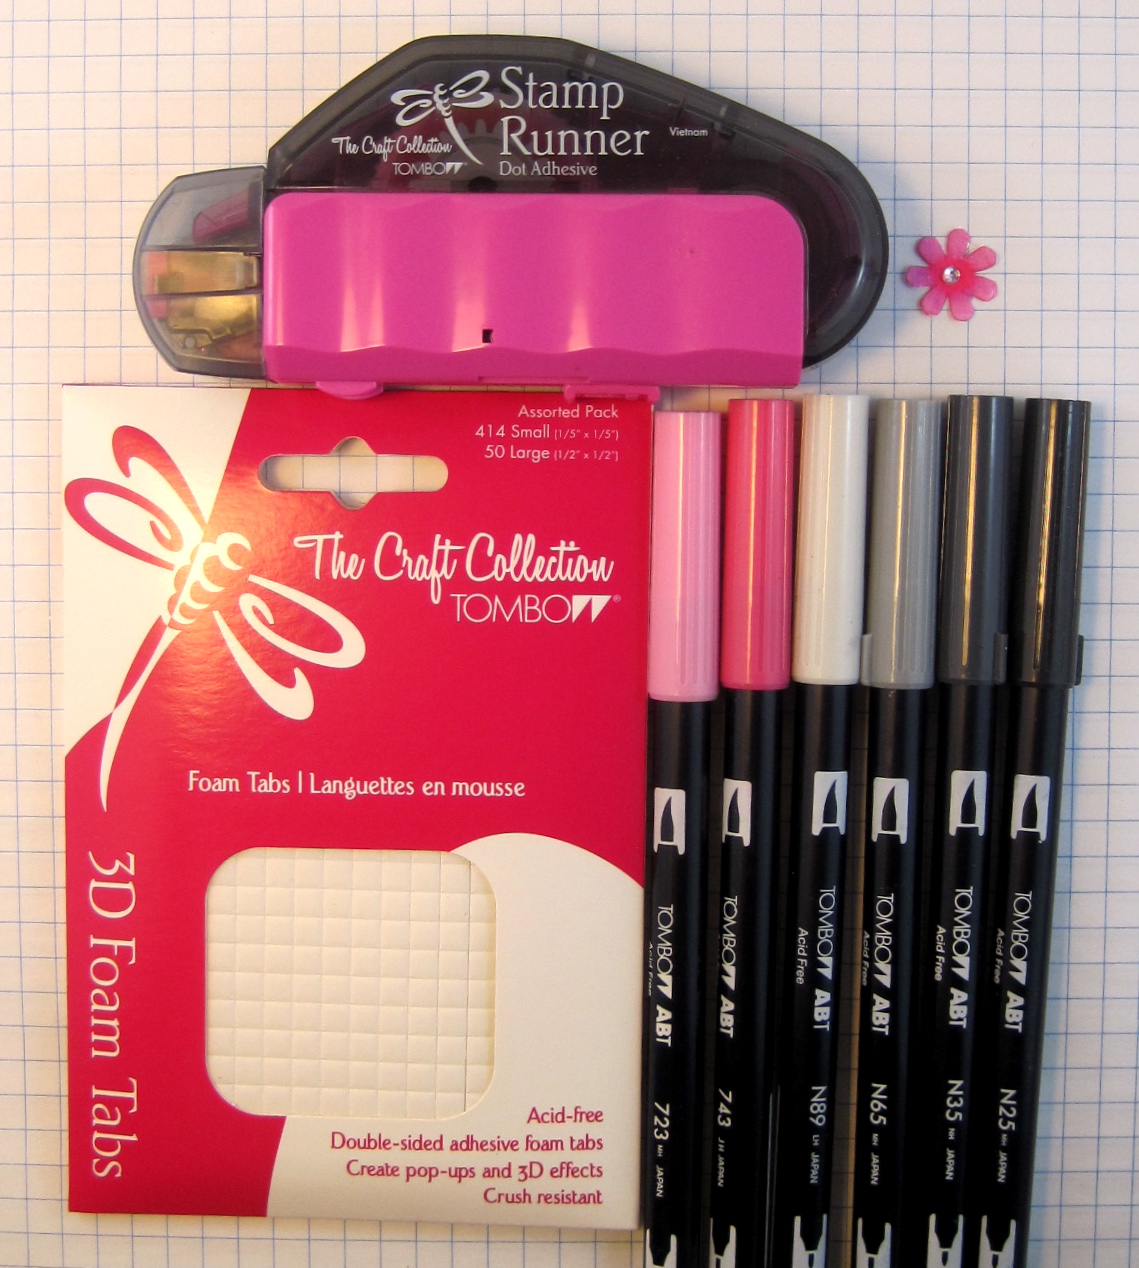 Stamp Runner Dot Adhesive Archives - Page 4 of 7 - Tombow USA Blog